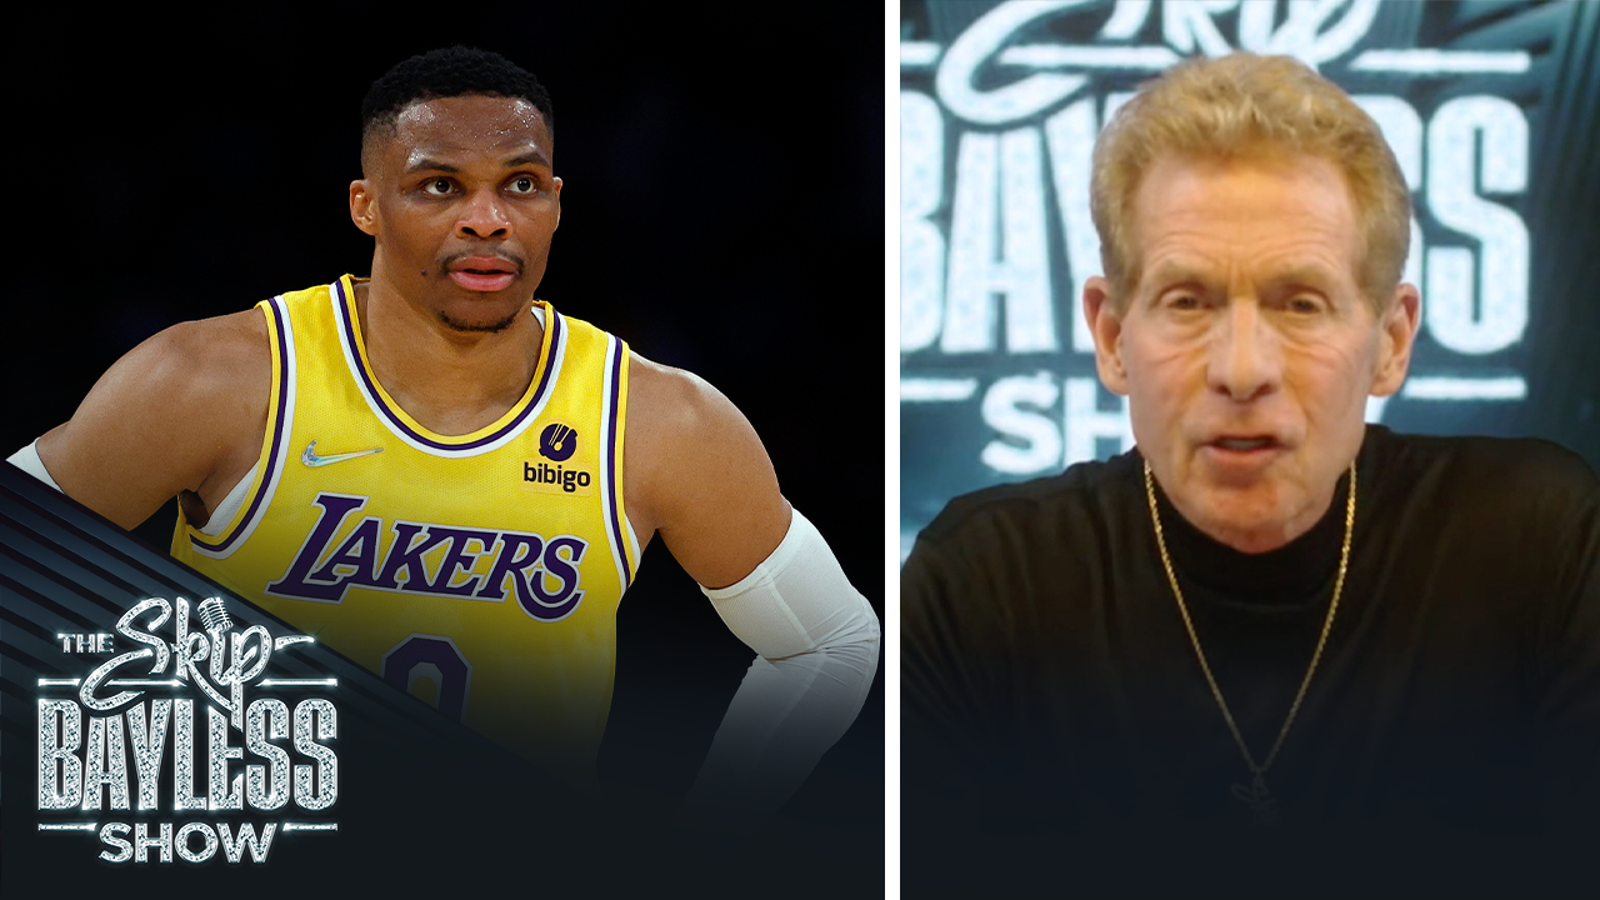 Skip Bayless: Westbrook could be out of basketball at age 35